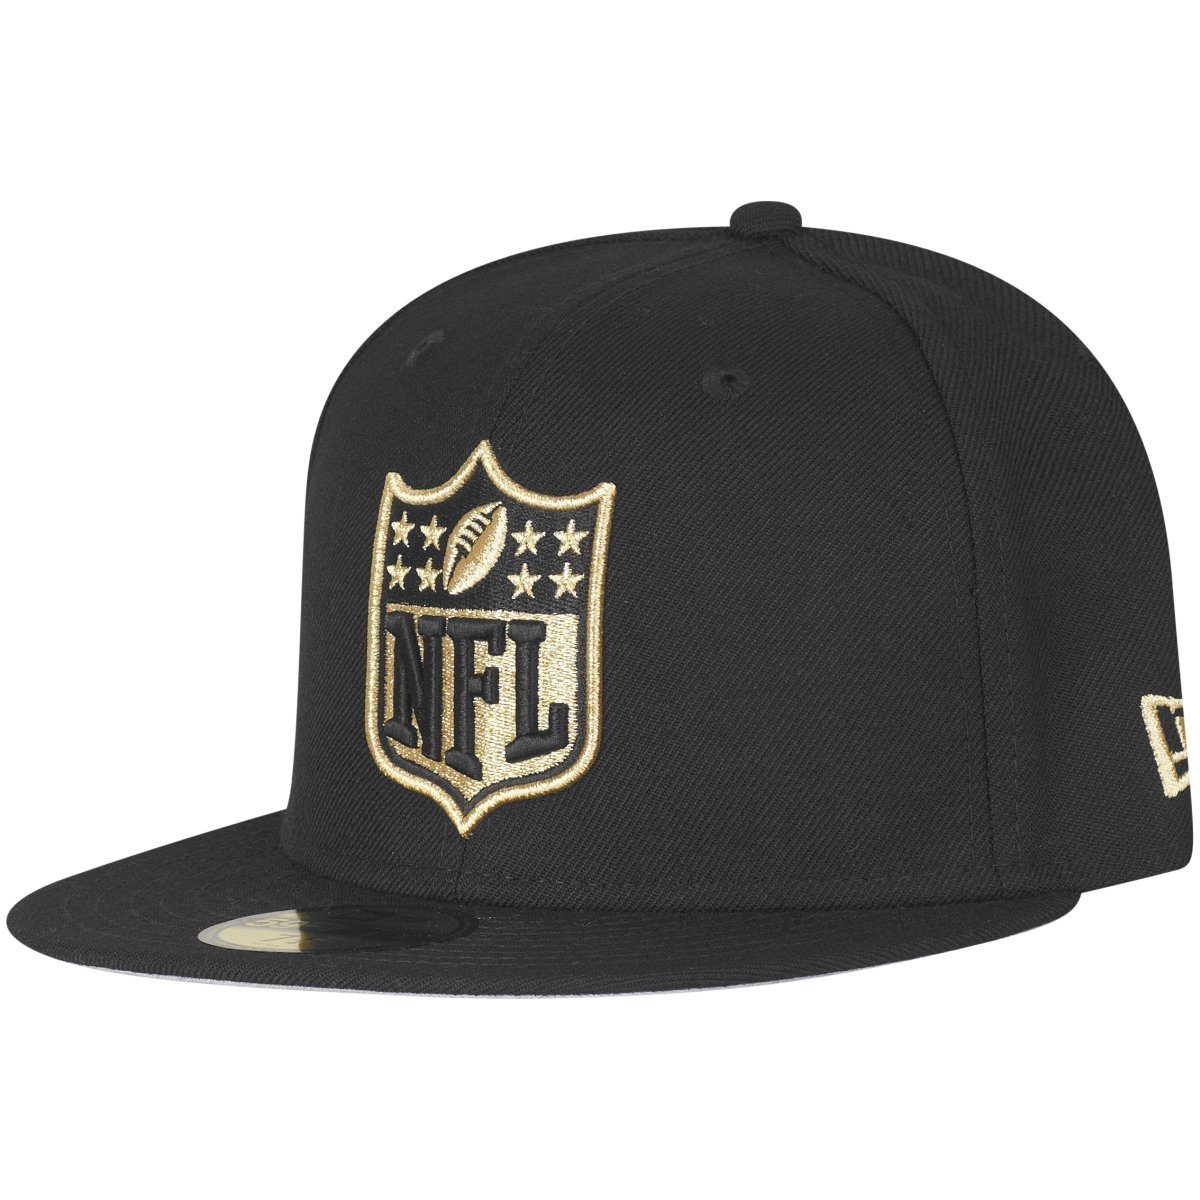 New Era Fitted Cap 59Fifty NFL SHIELD Logo gold